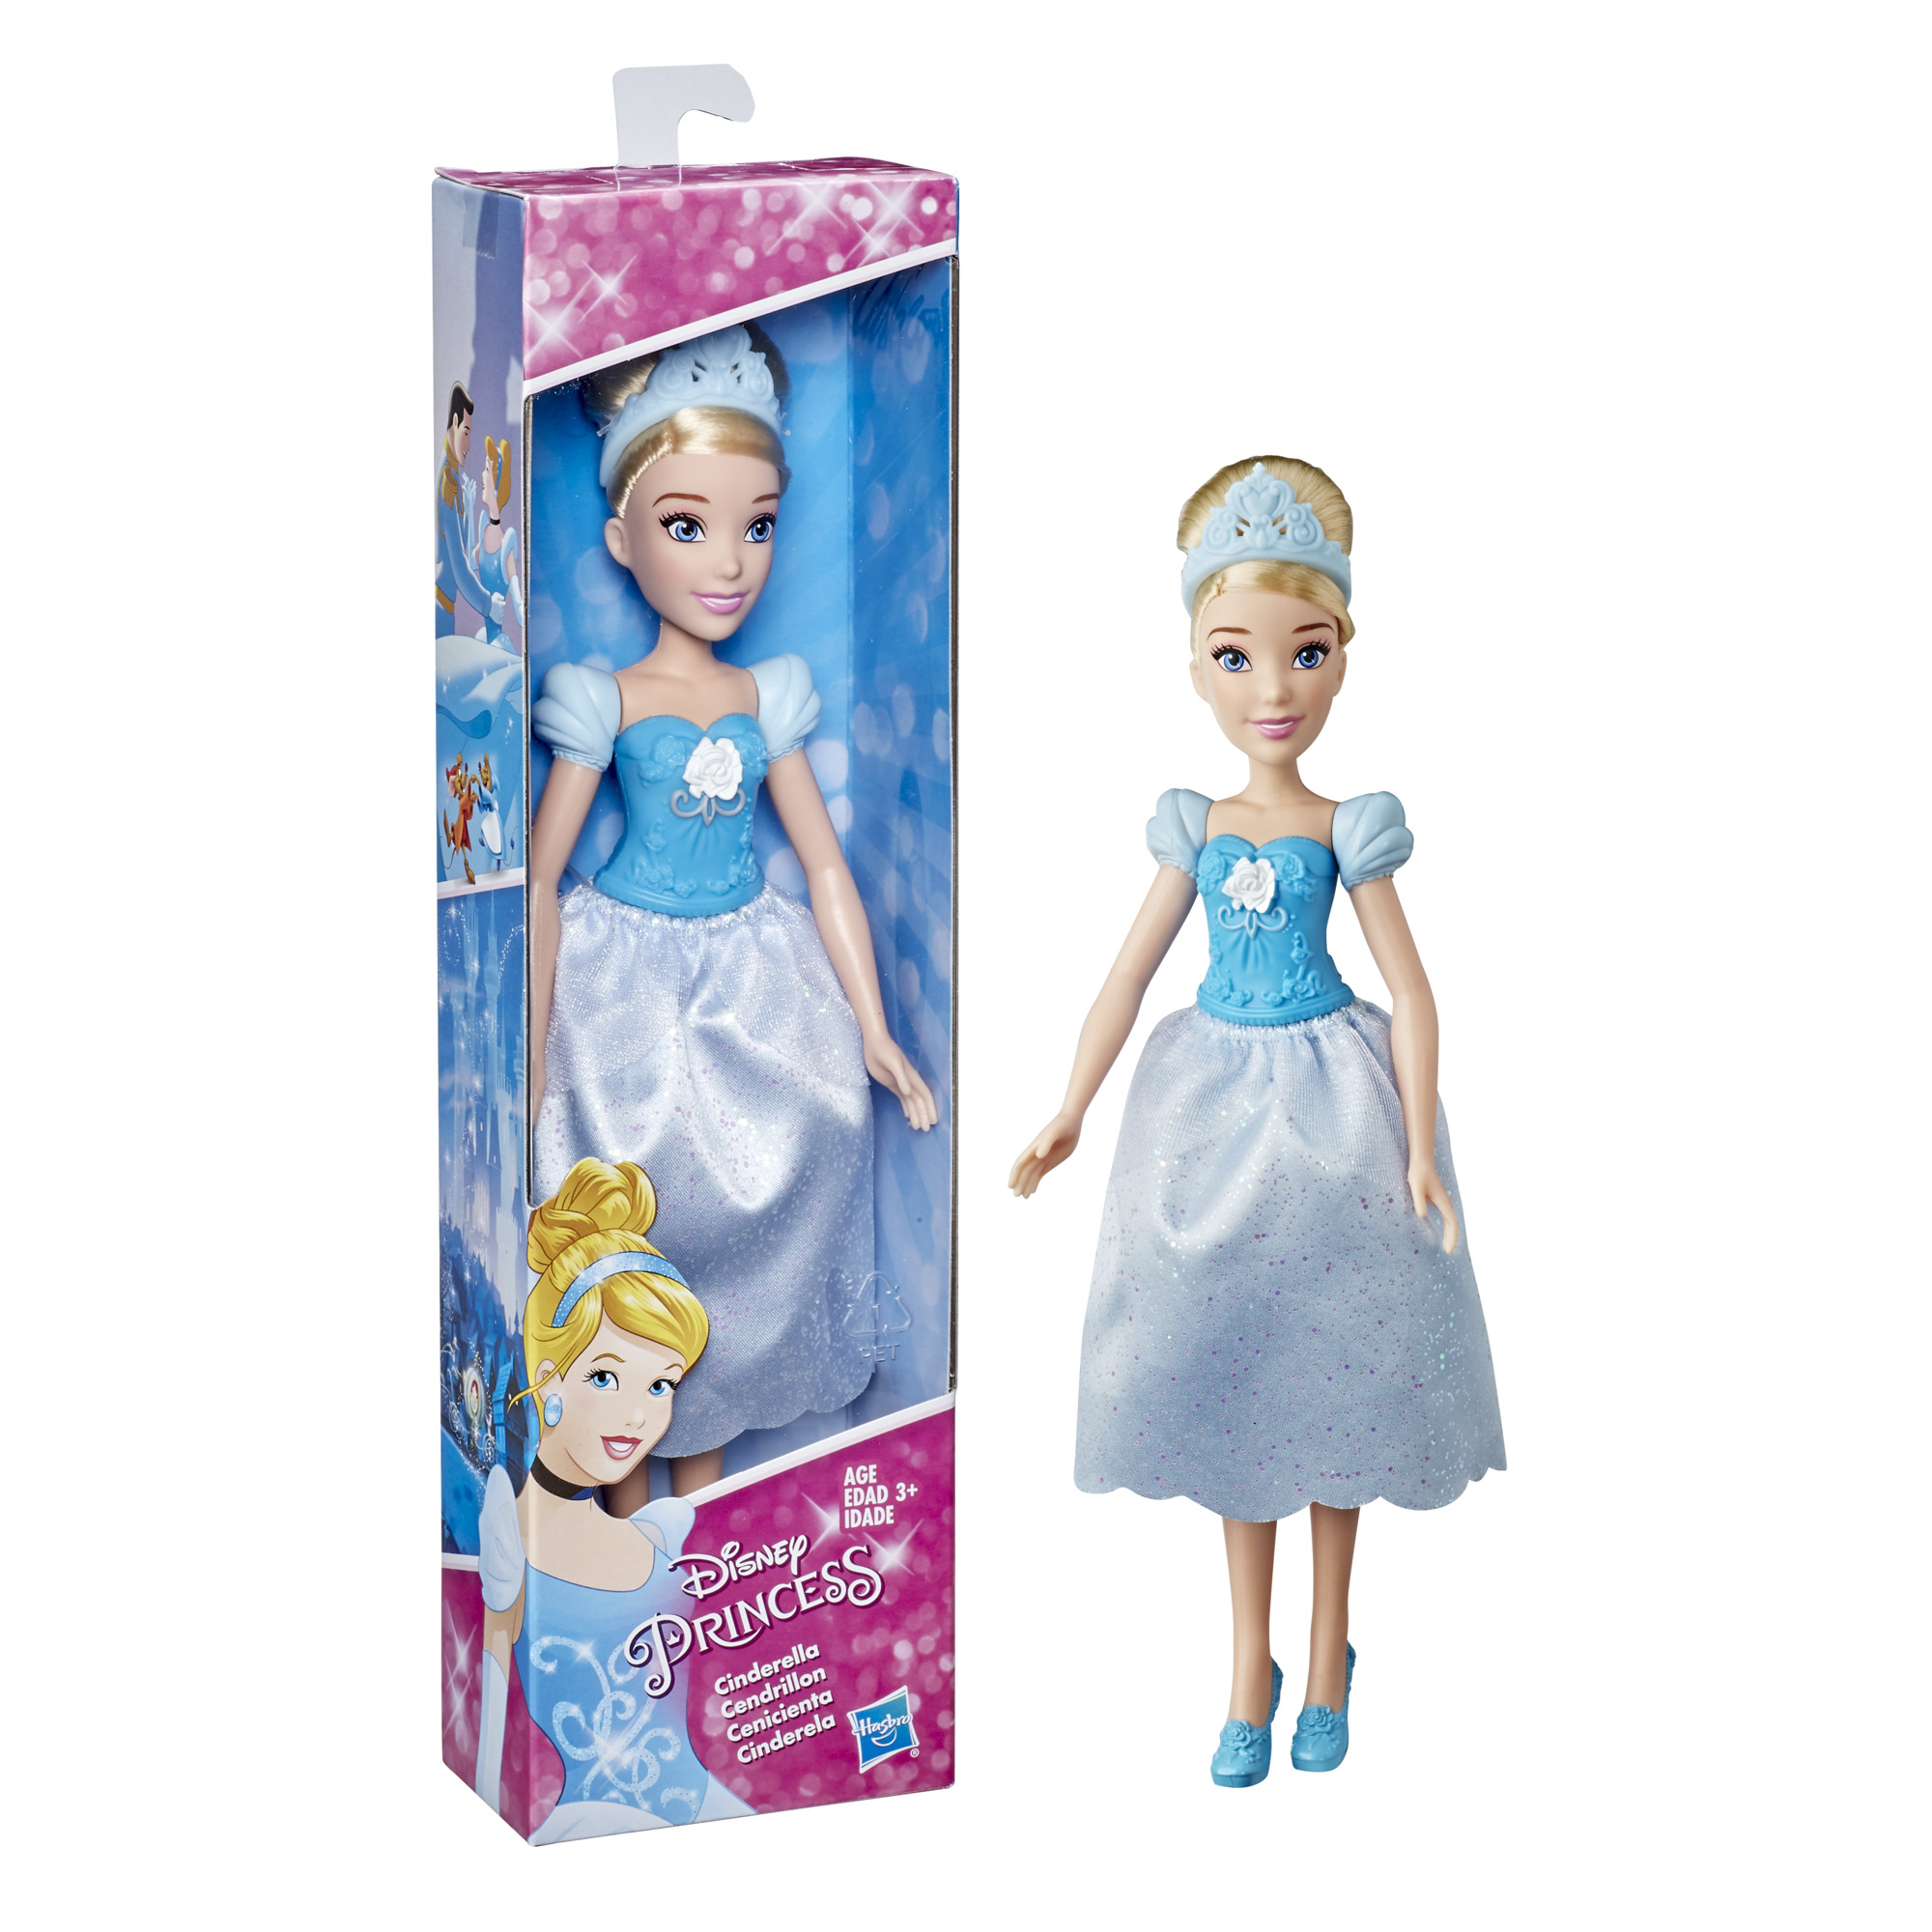 Disney Princess Cinderella Fashion Doll, for Kids Ages 3 and Up - image 4 of 4